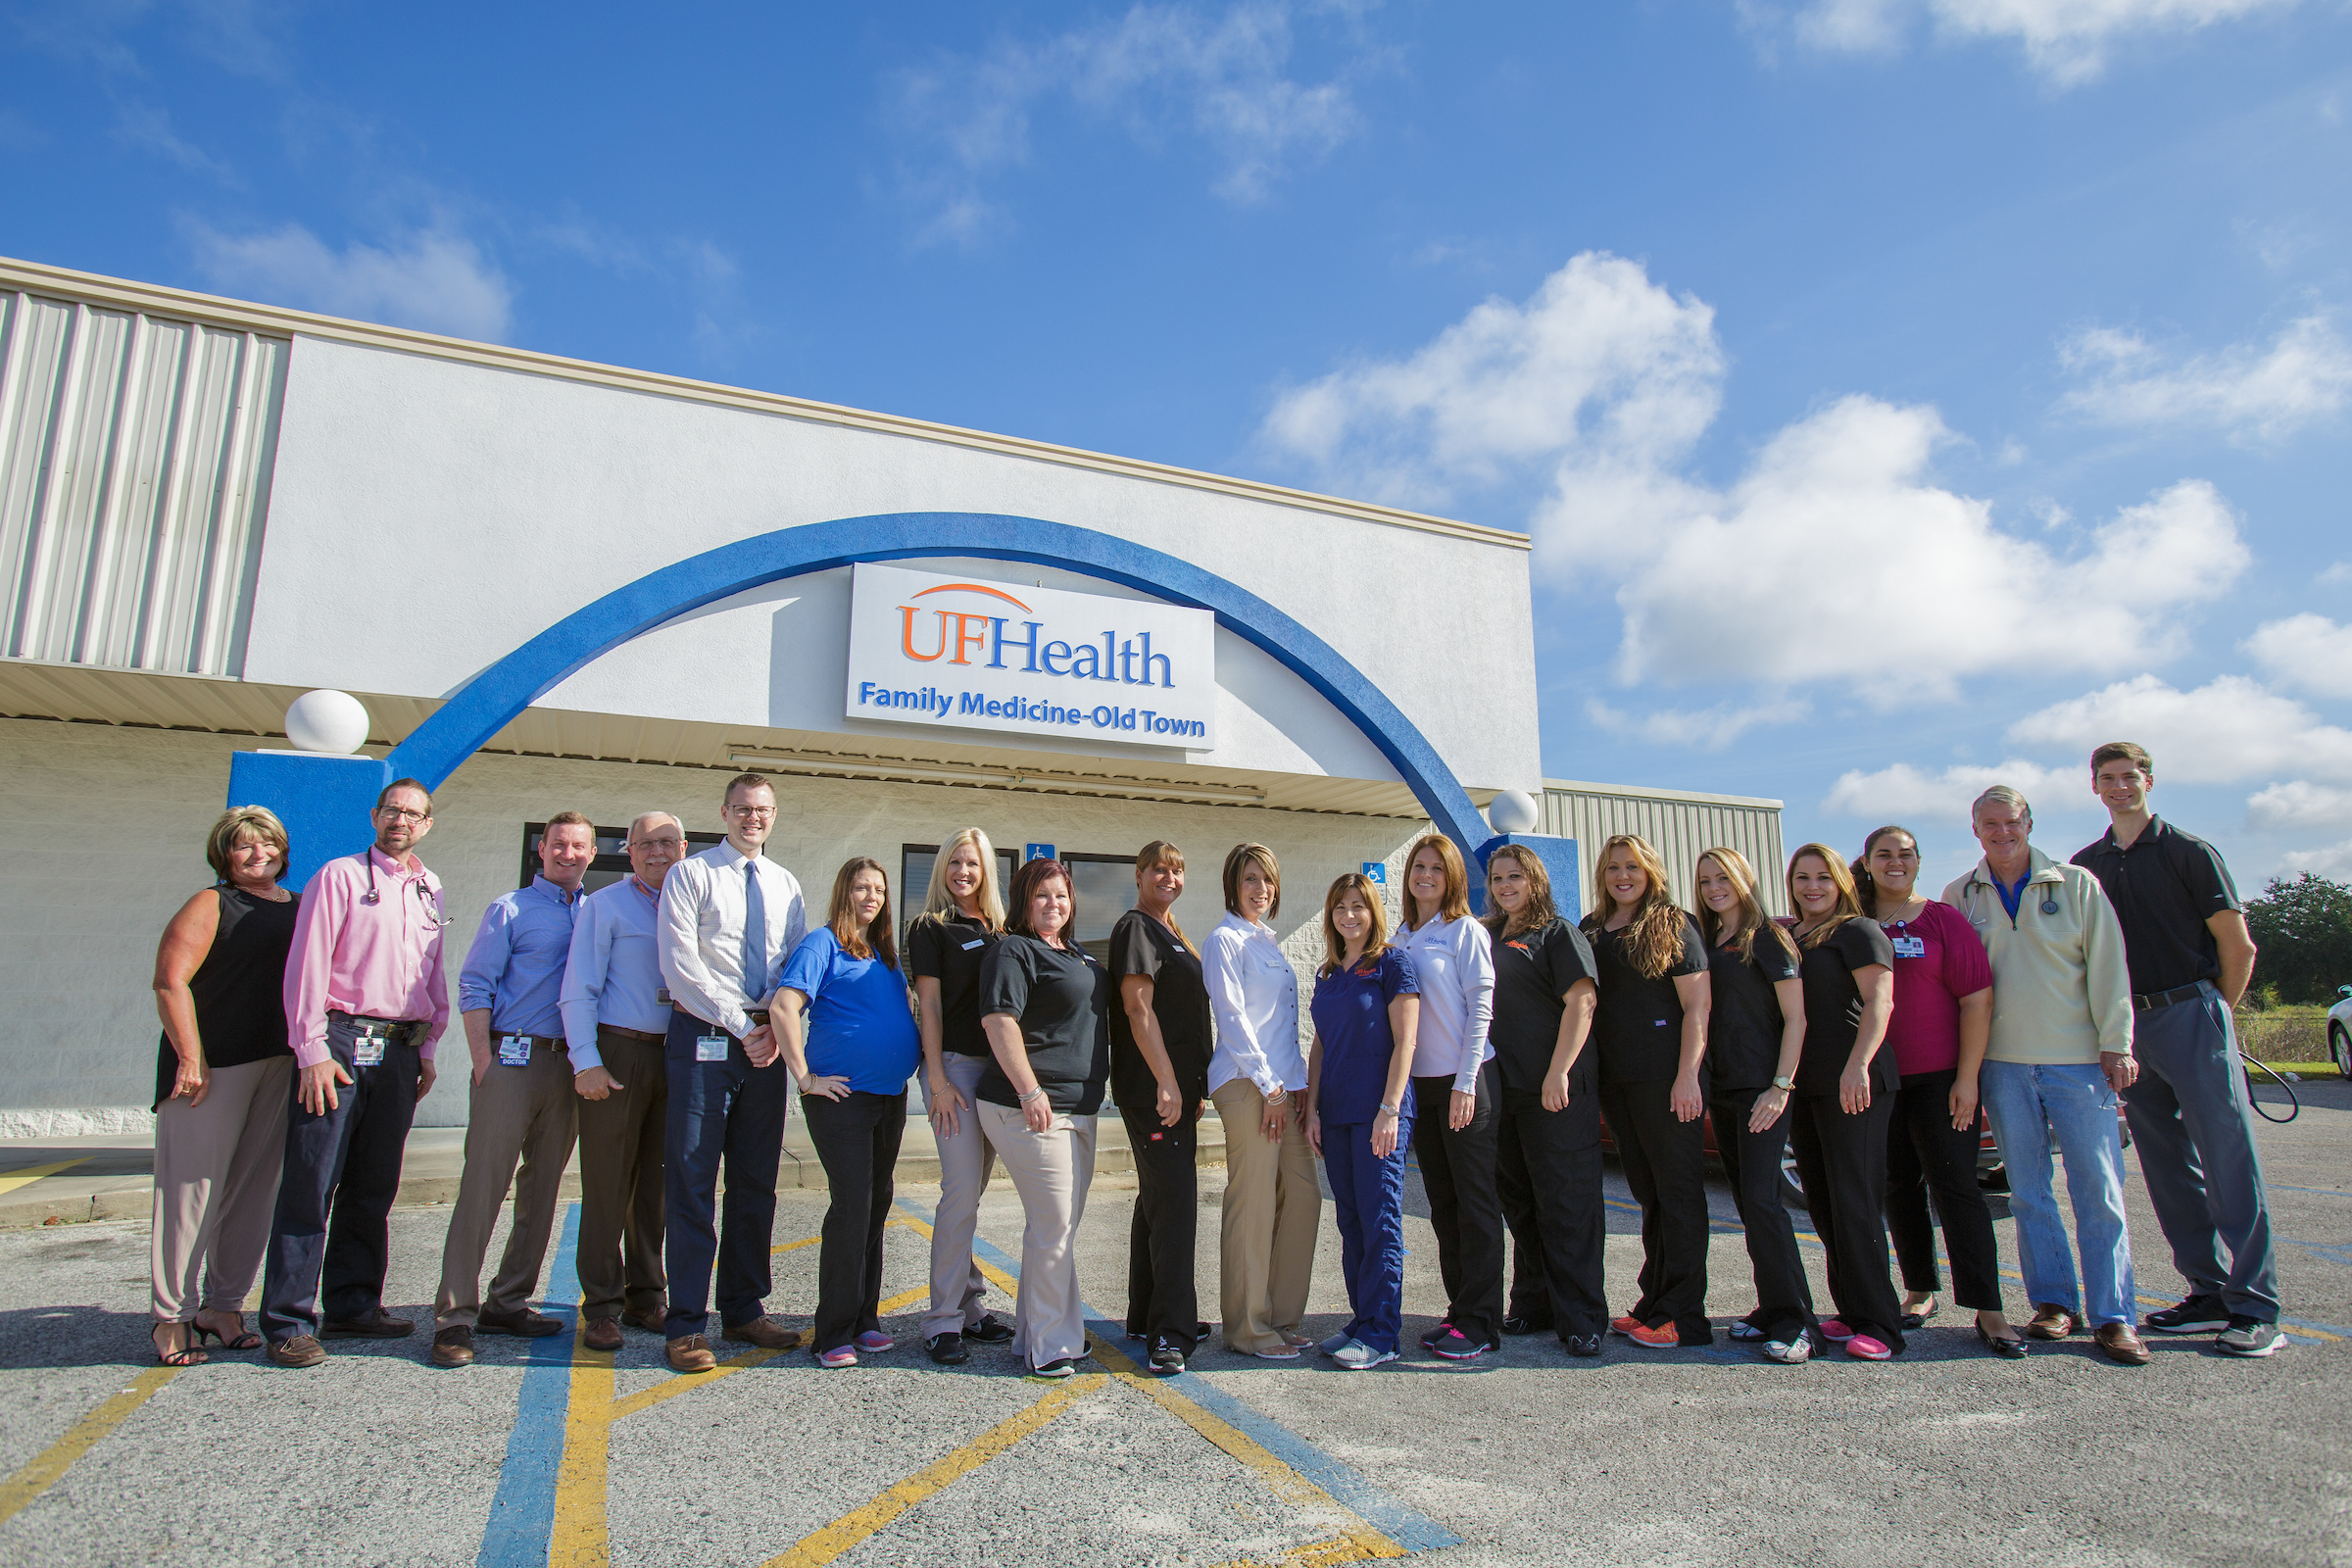 UF Health Family Medicine - Old Town